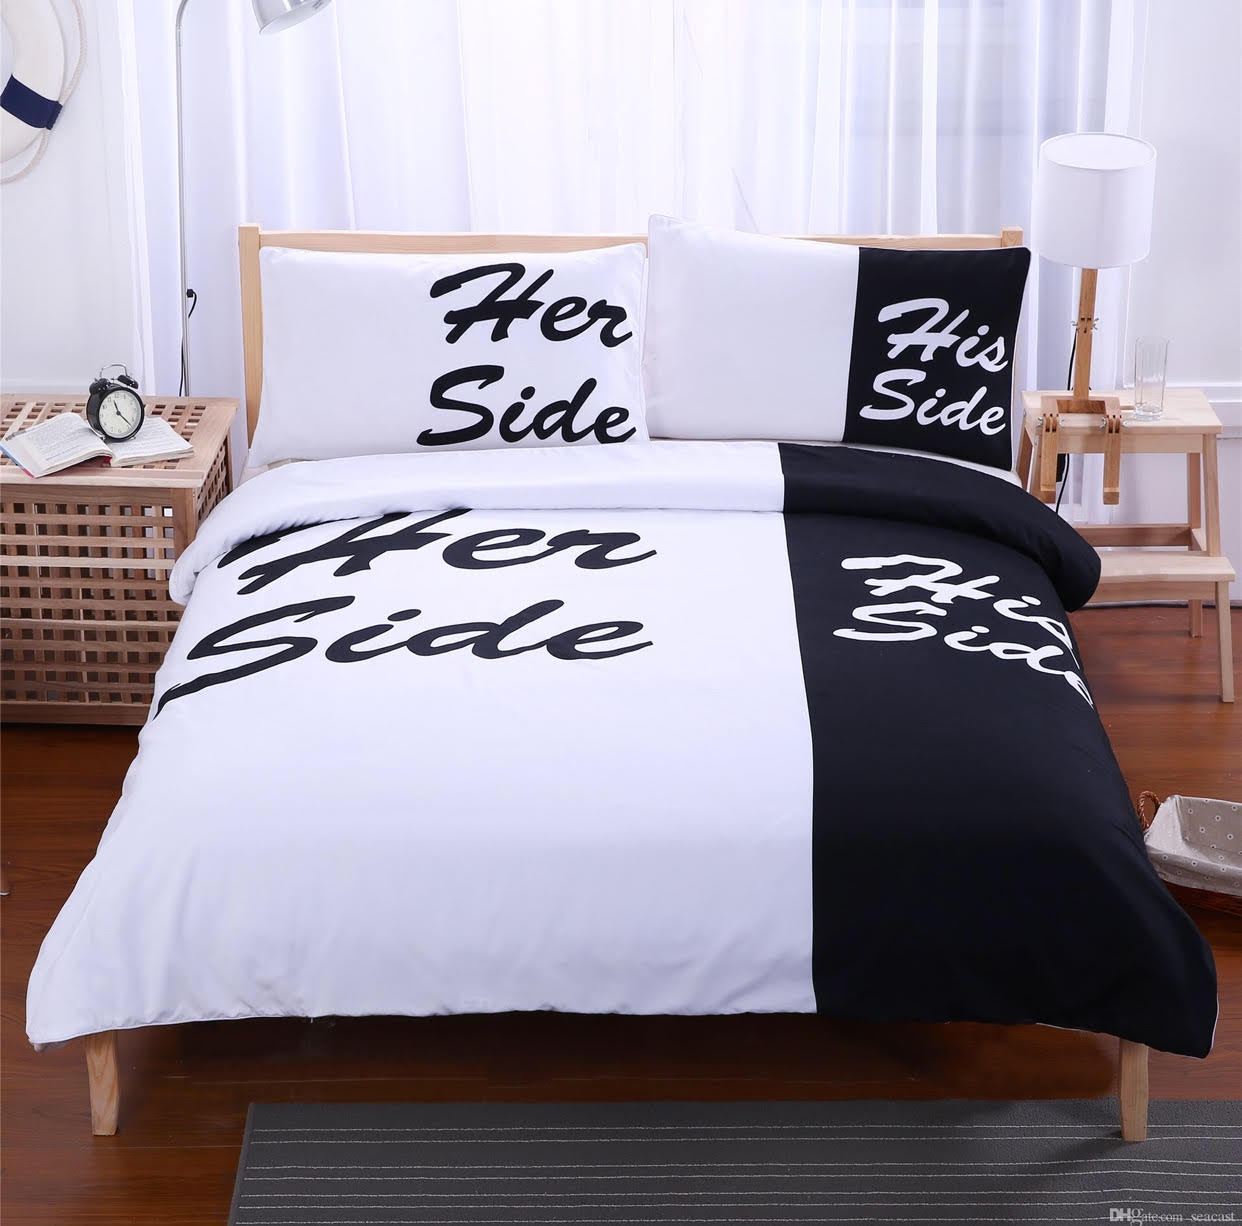 king size comforters that fit